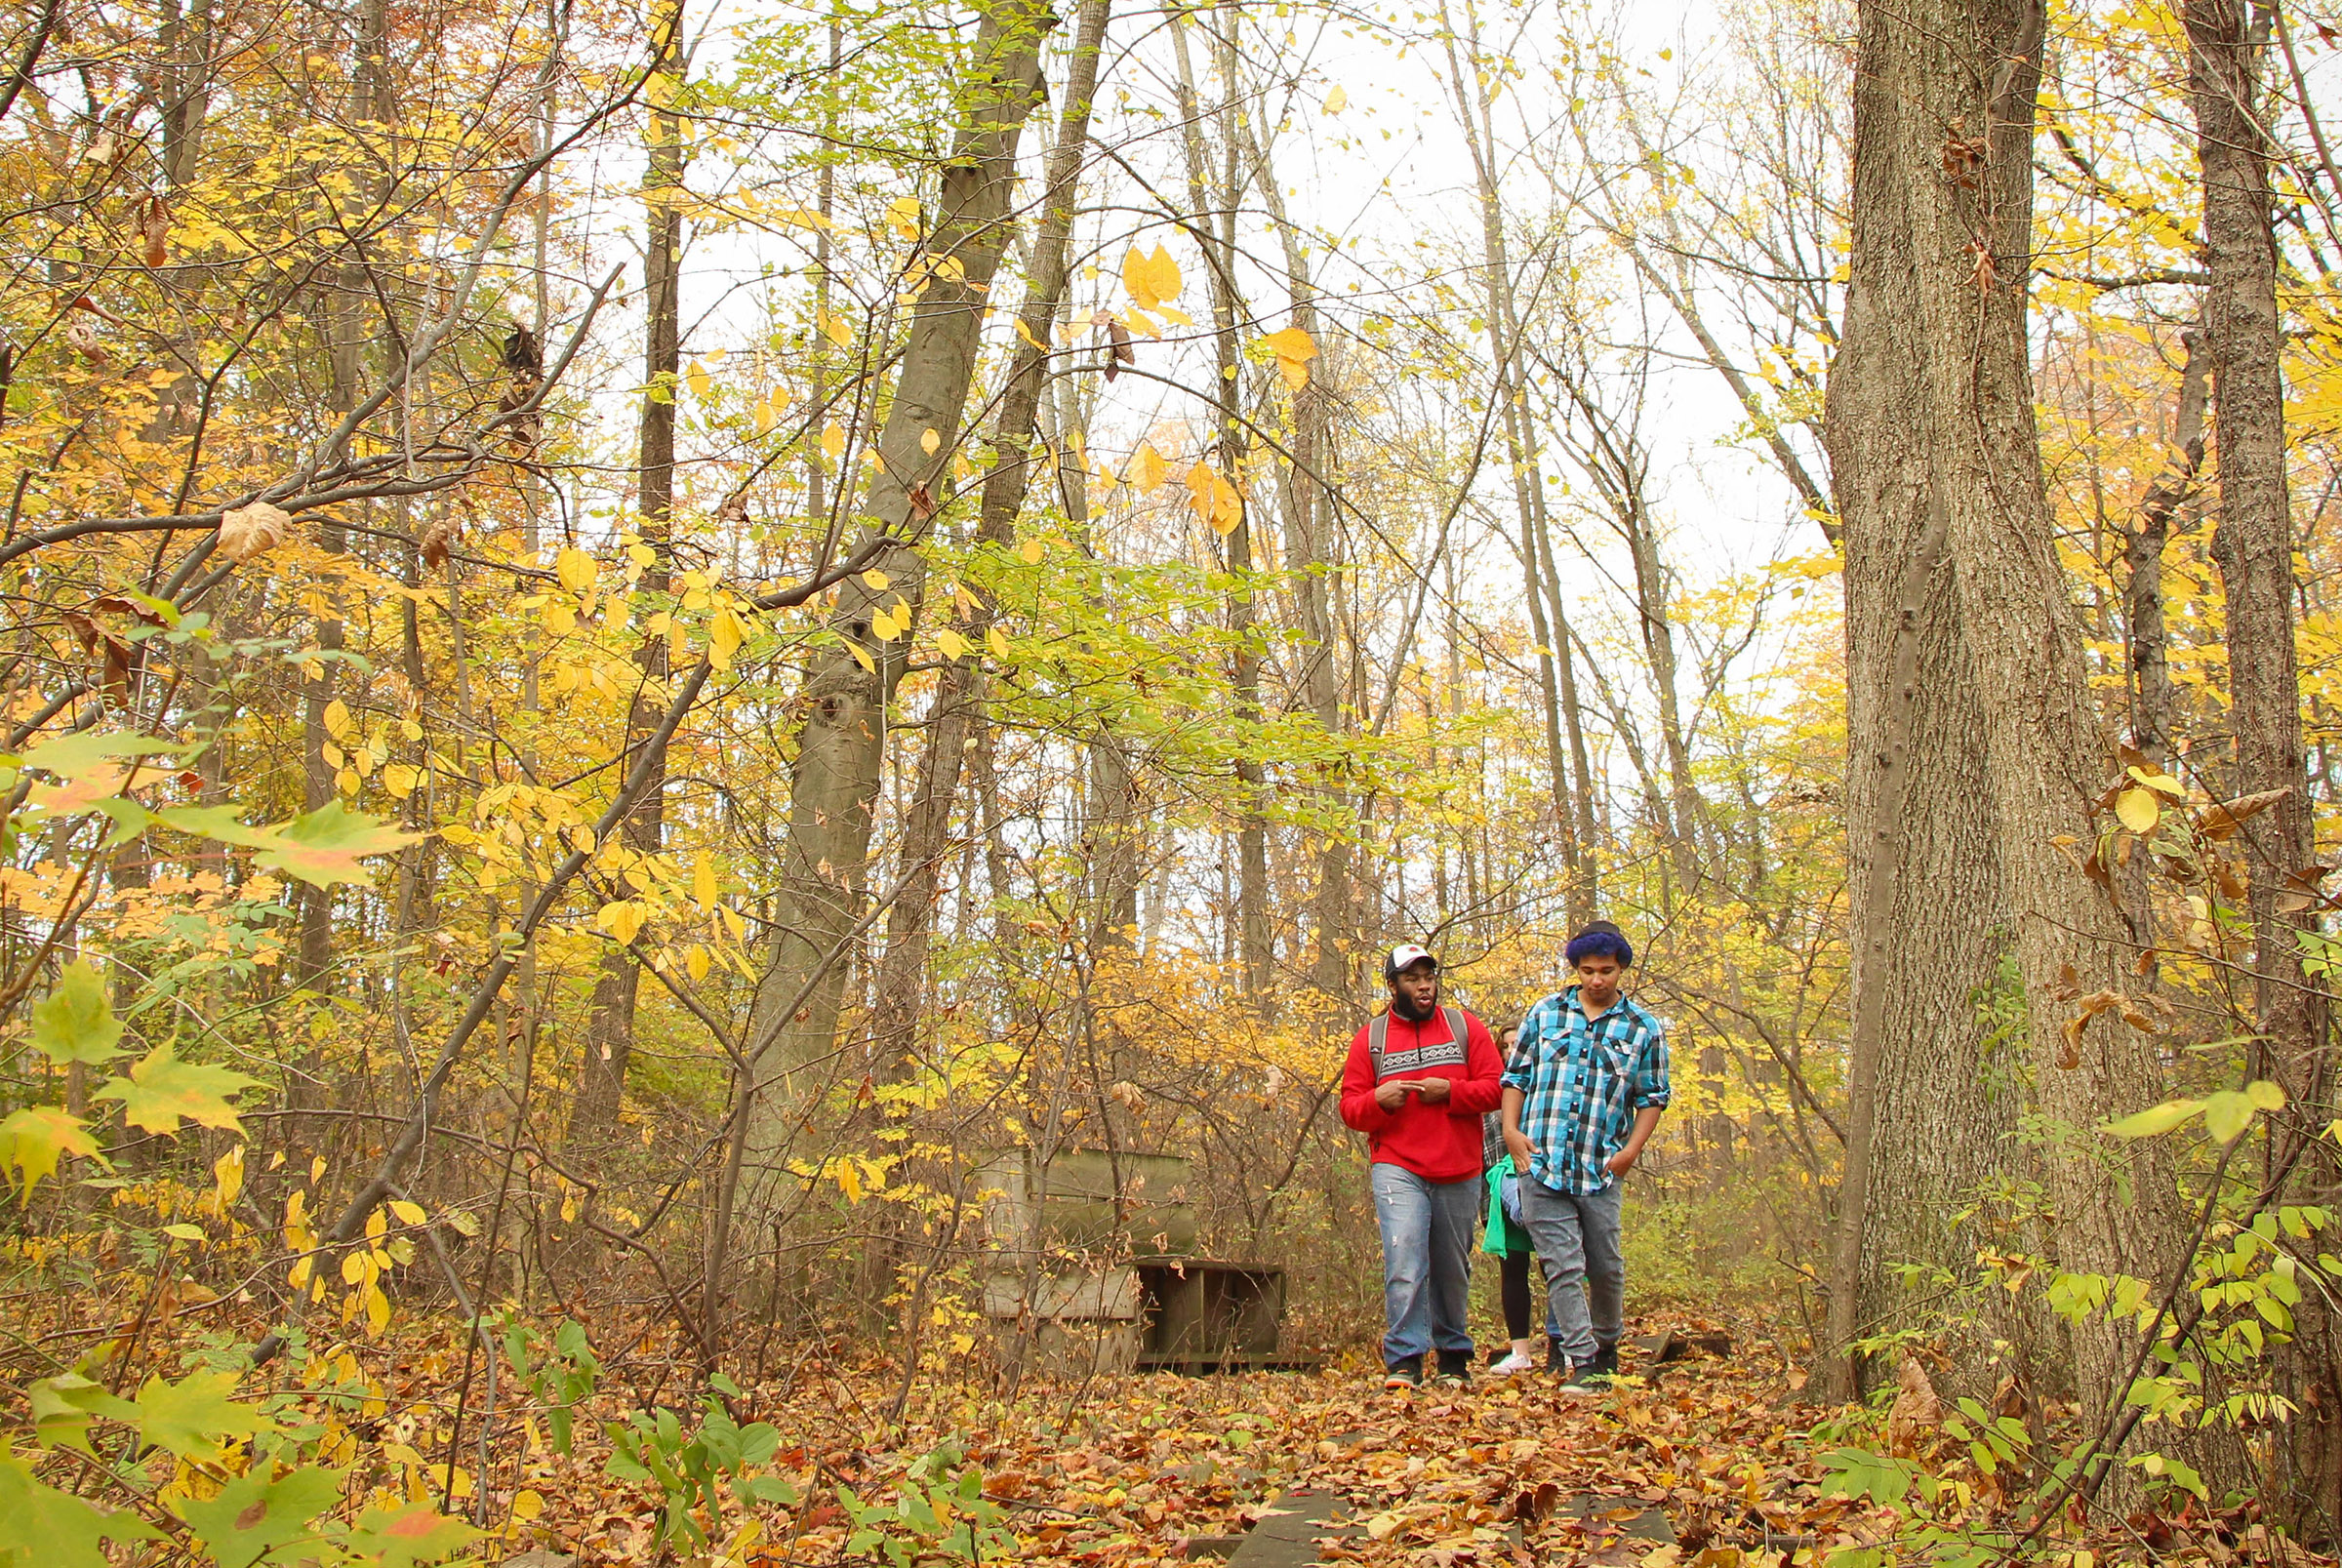 Students hiking the trail in autumn.